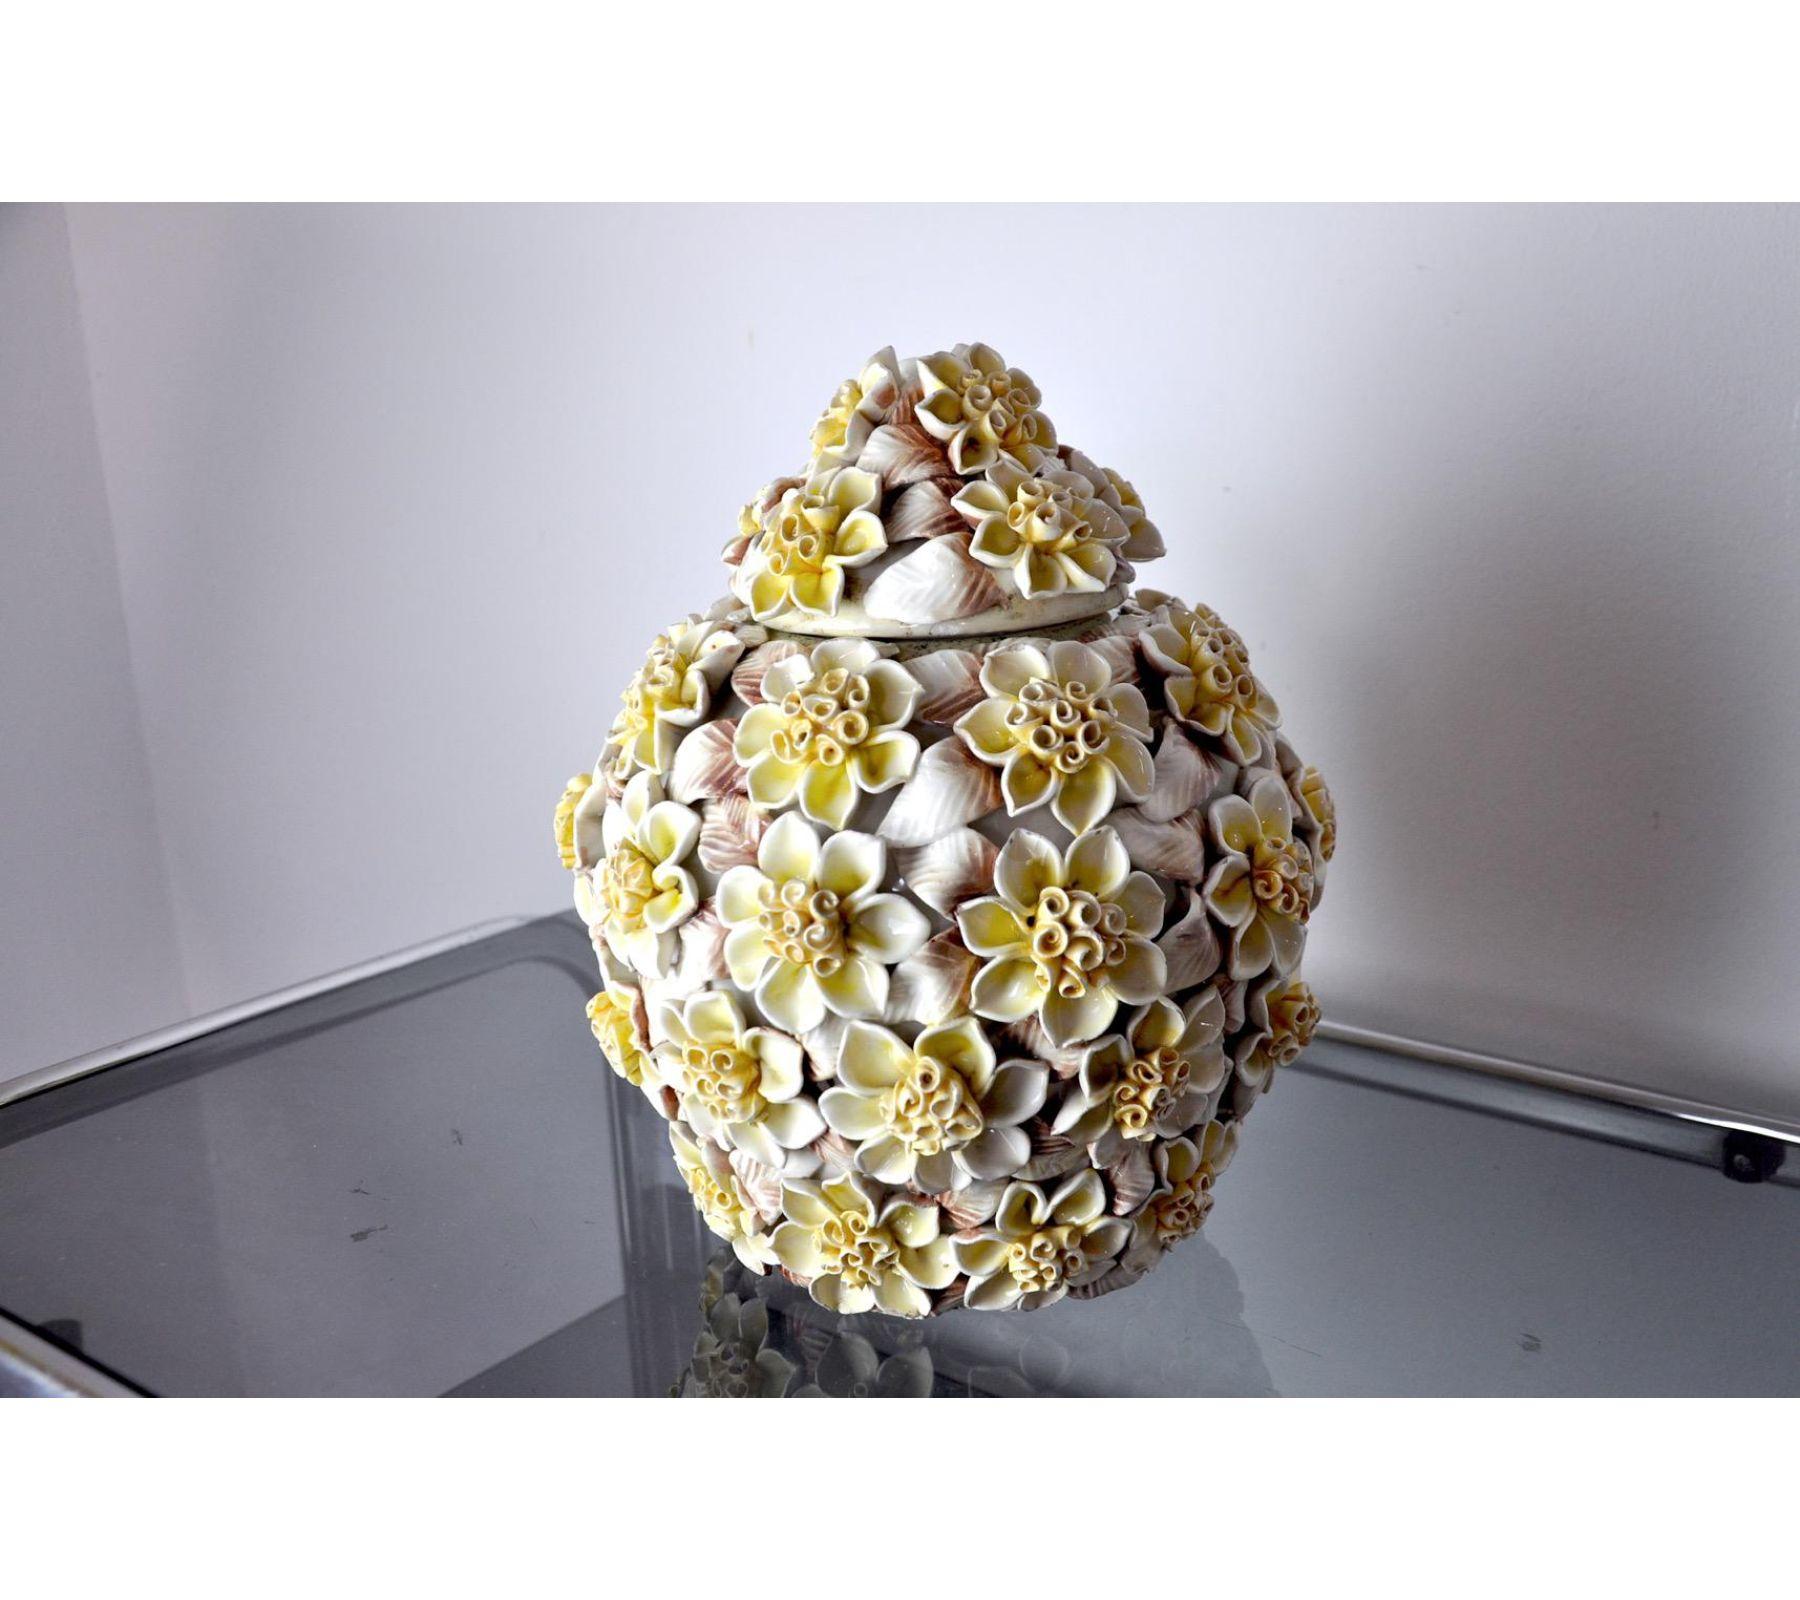 Very beautiful and rare ceramic flower vase from the house manises, valencia, spain, produced and designated in the 1970s. This vase is of a superb manufacture, of a pink and pale yellow color. A unique piece of design that will decorate your